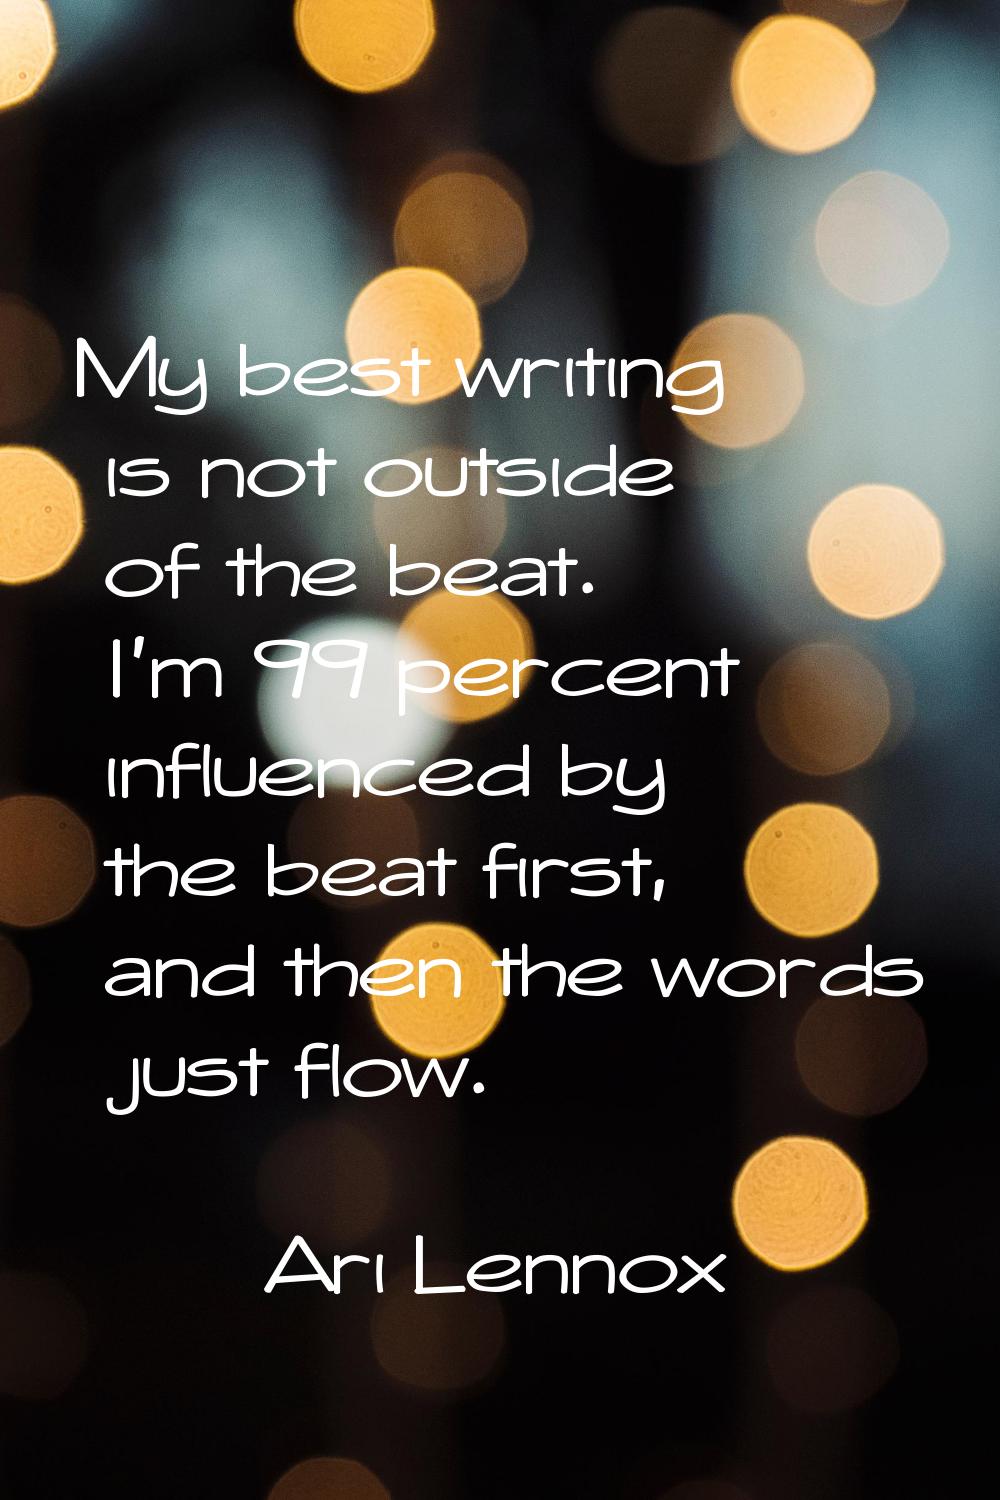 My best writing is not outside of the beat. I'm 99 percent influenced by the beat first, and then t